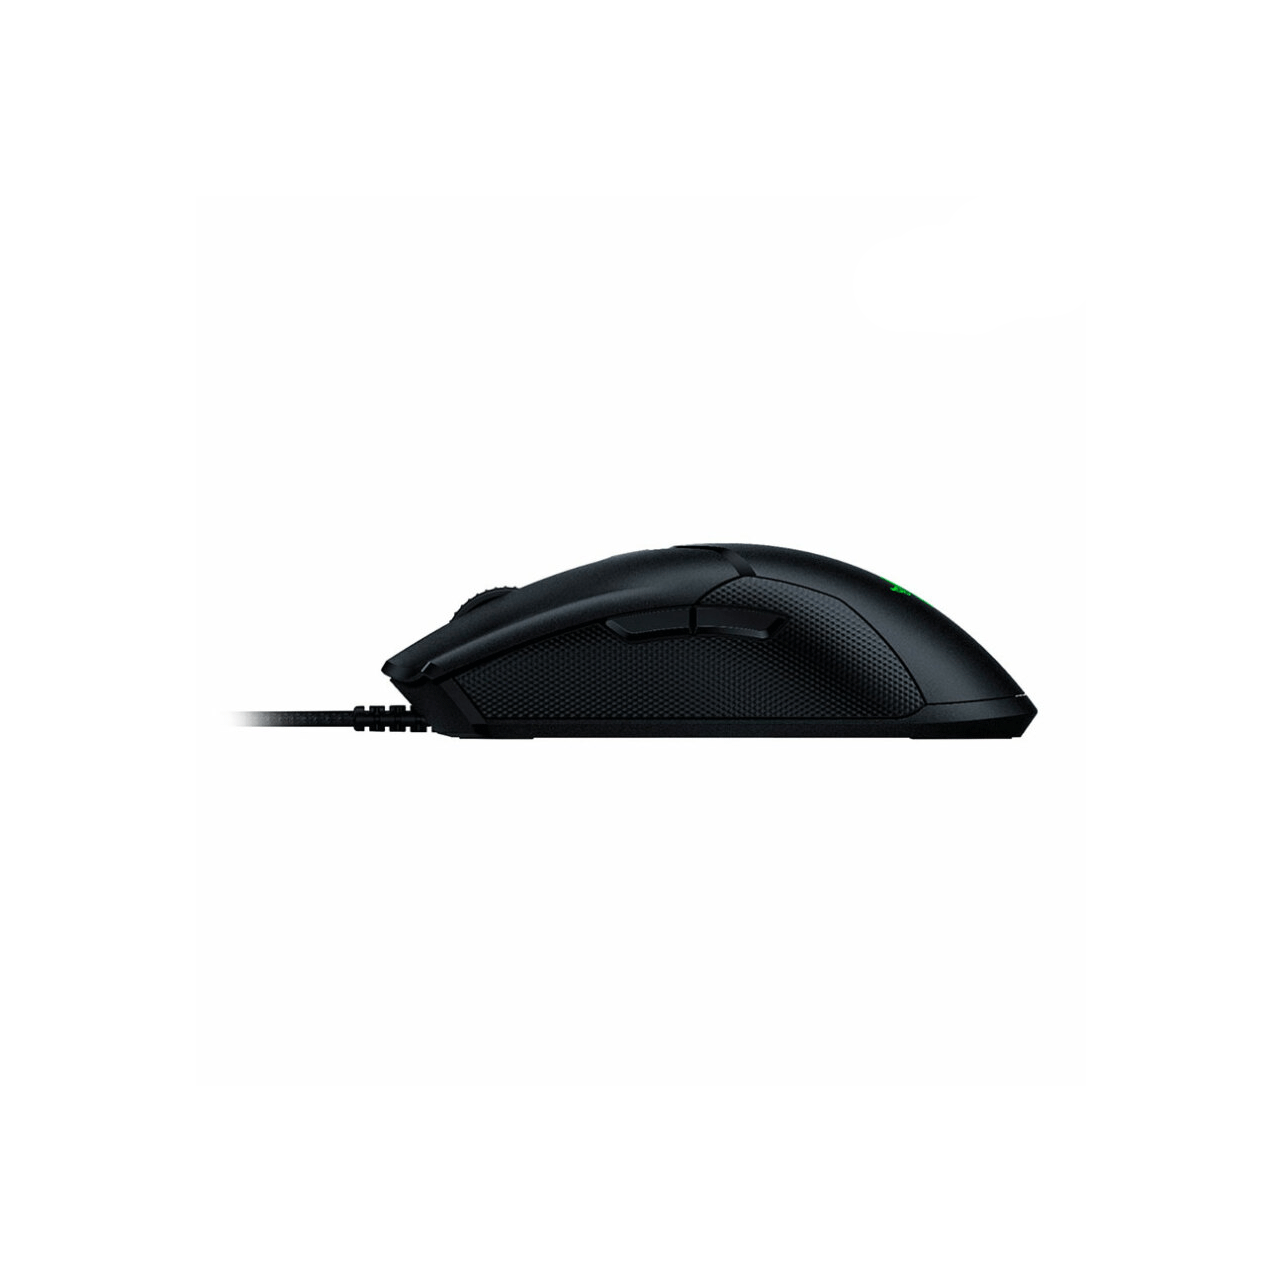 VIPER-ULTIMAT--E--Wireless-Gaming-Mouse